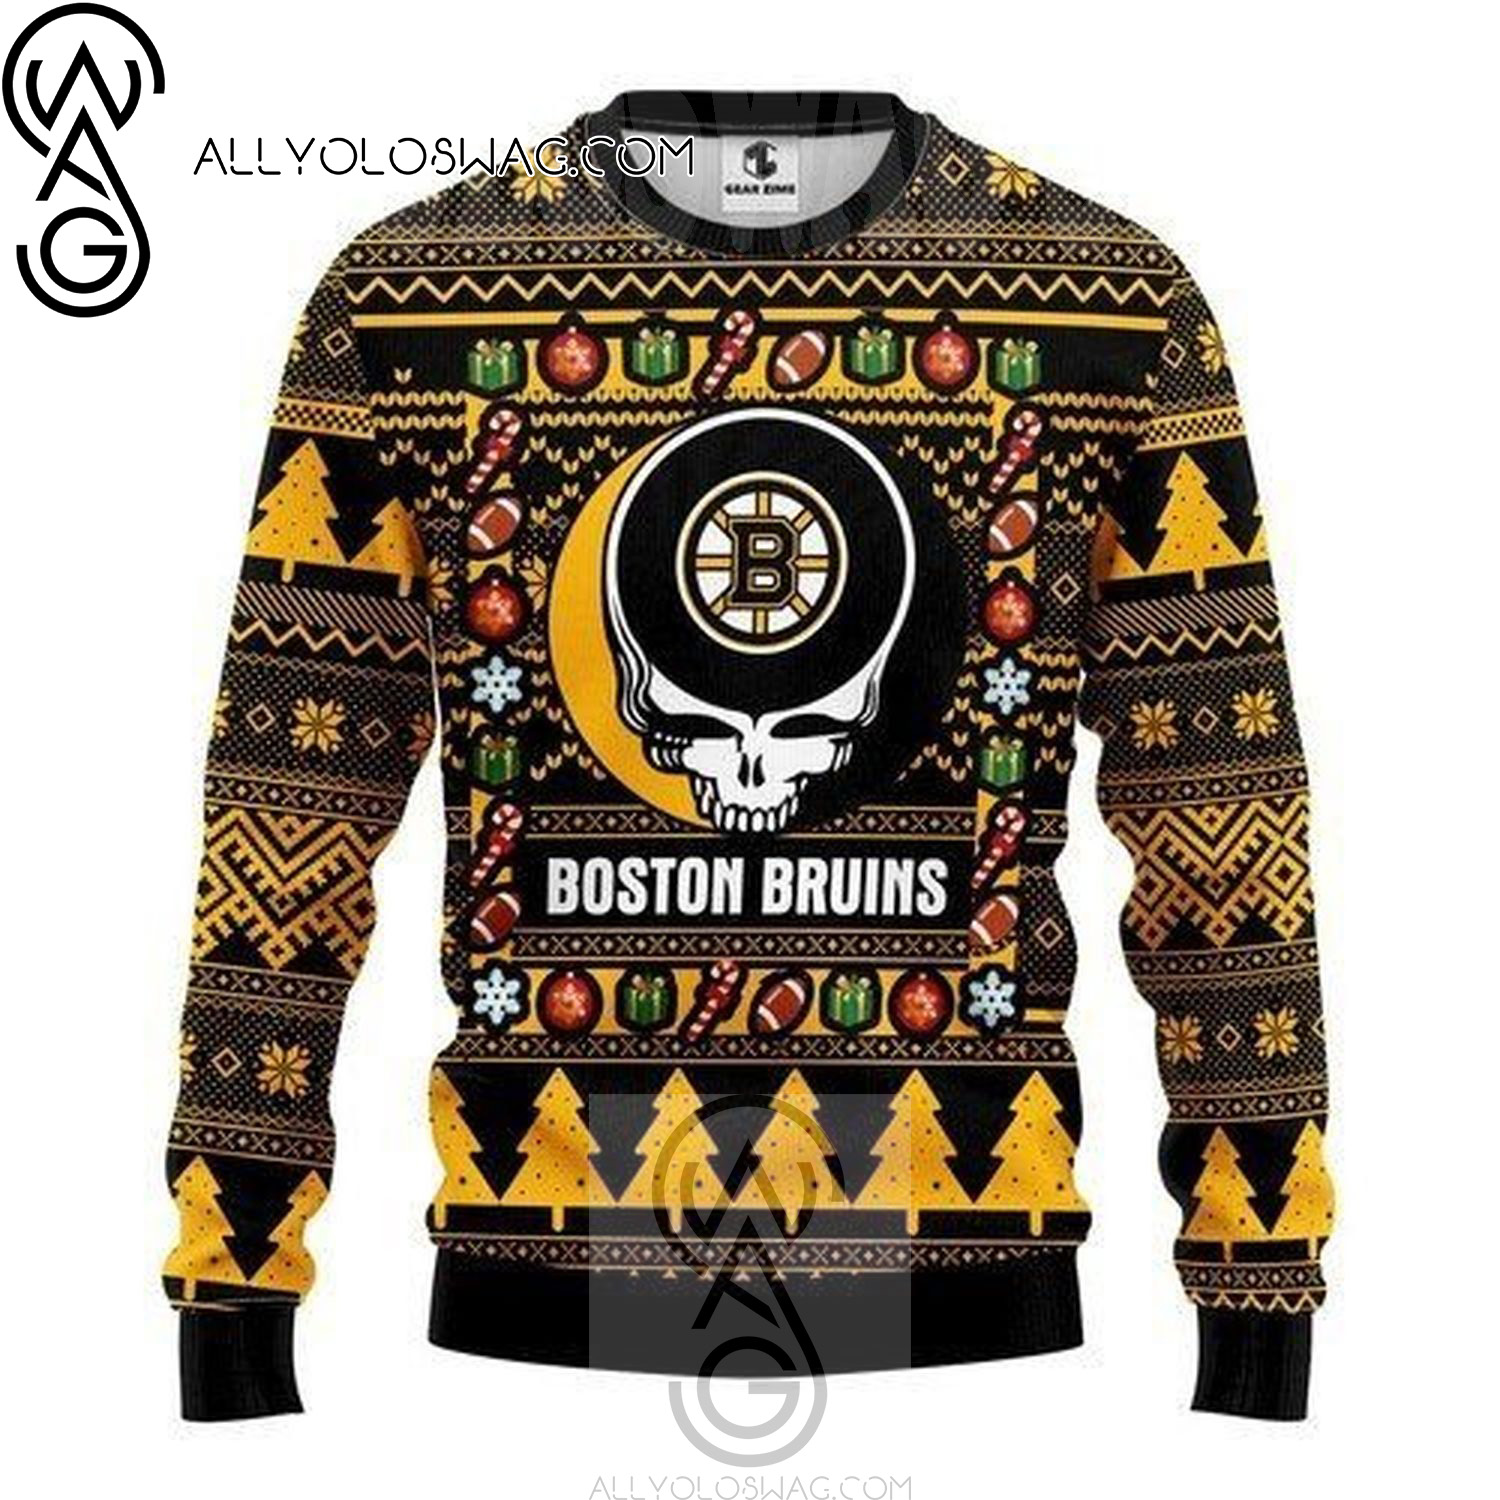 Boston Bruins Grateful Dead Rock Band Ugly Christmas Sweater